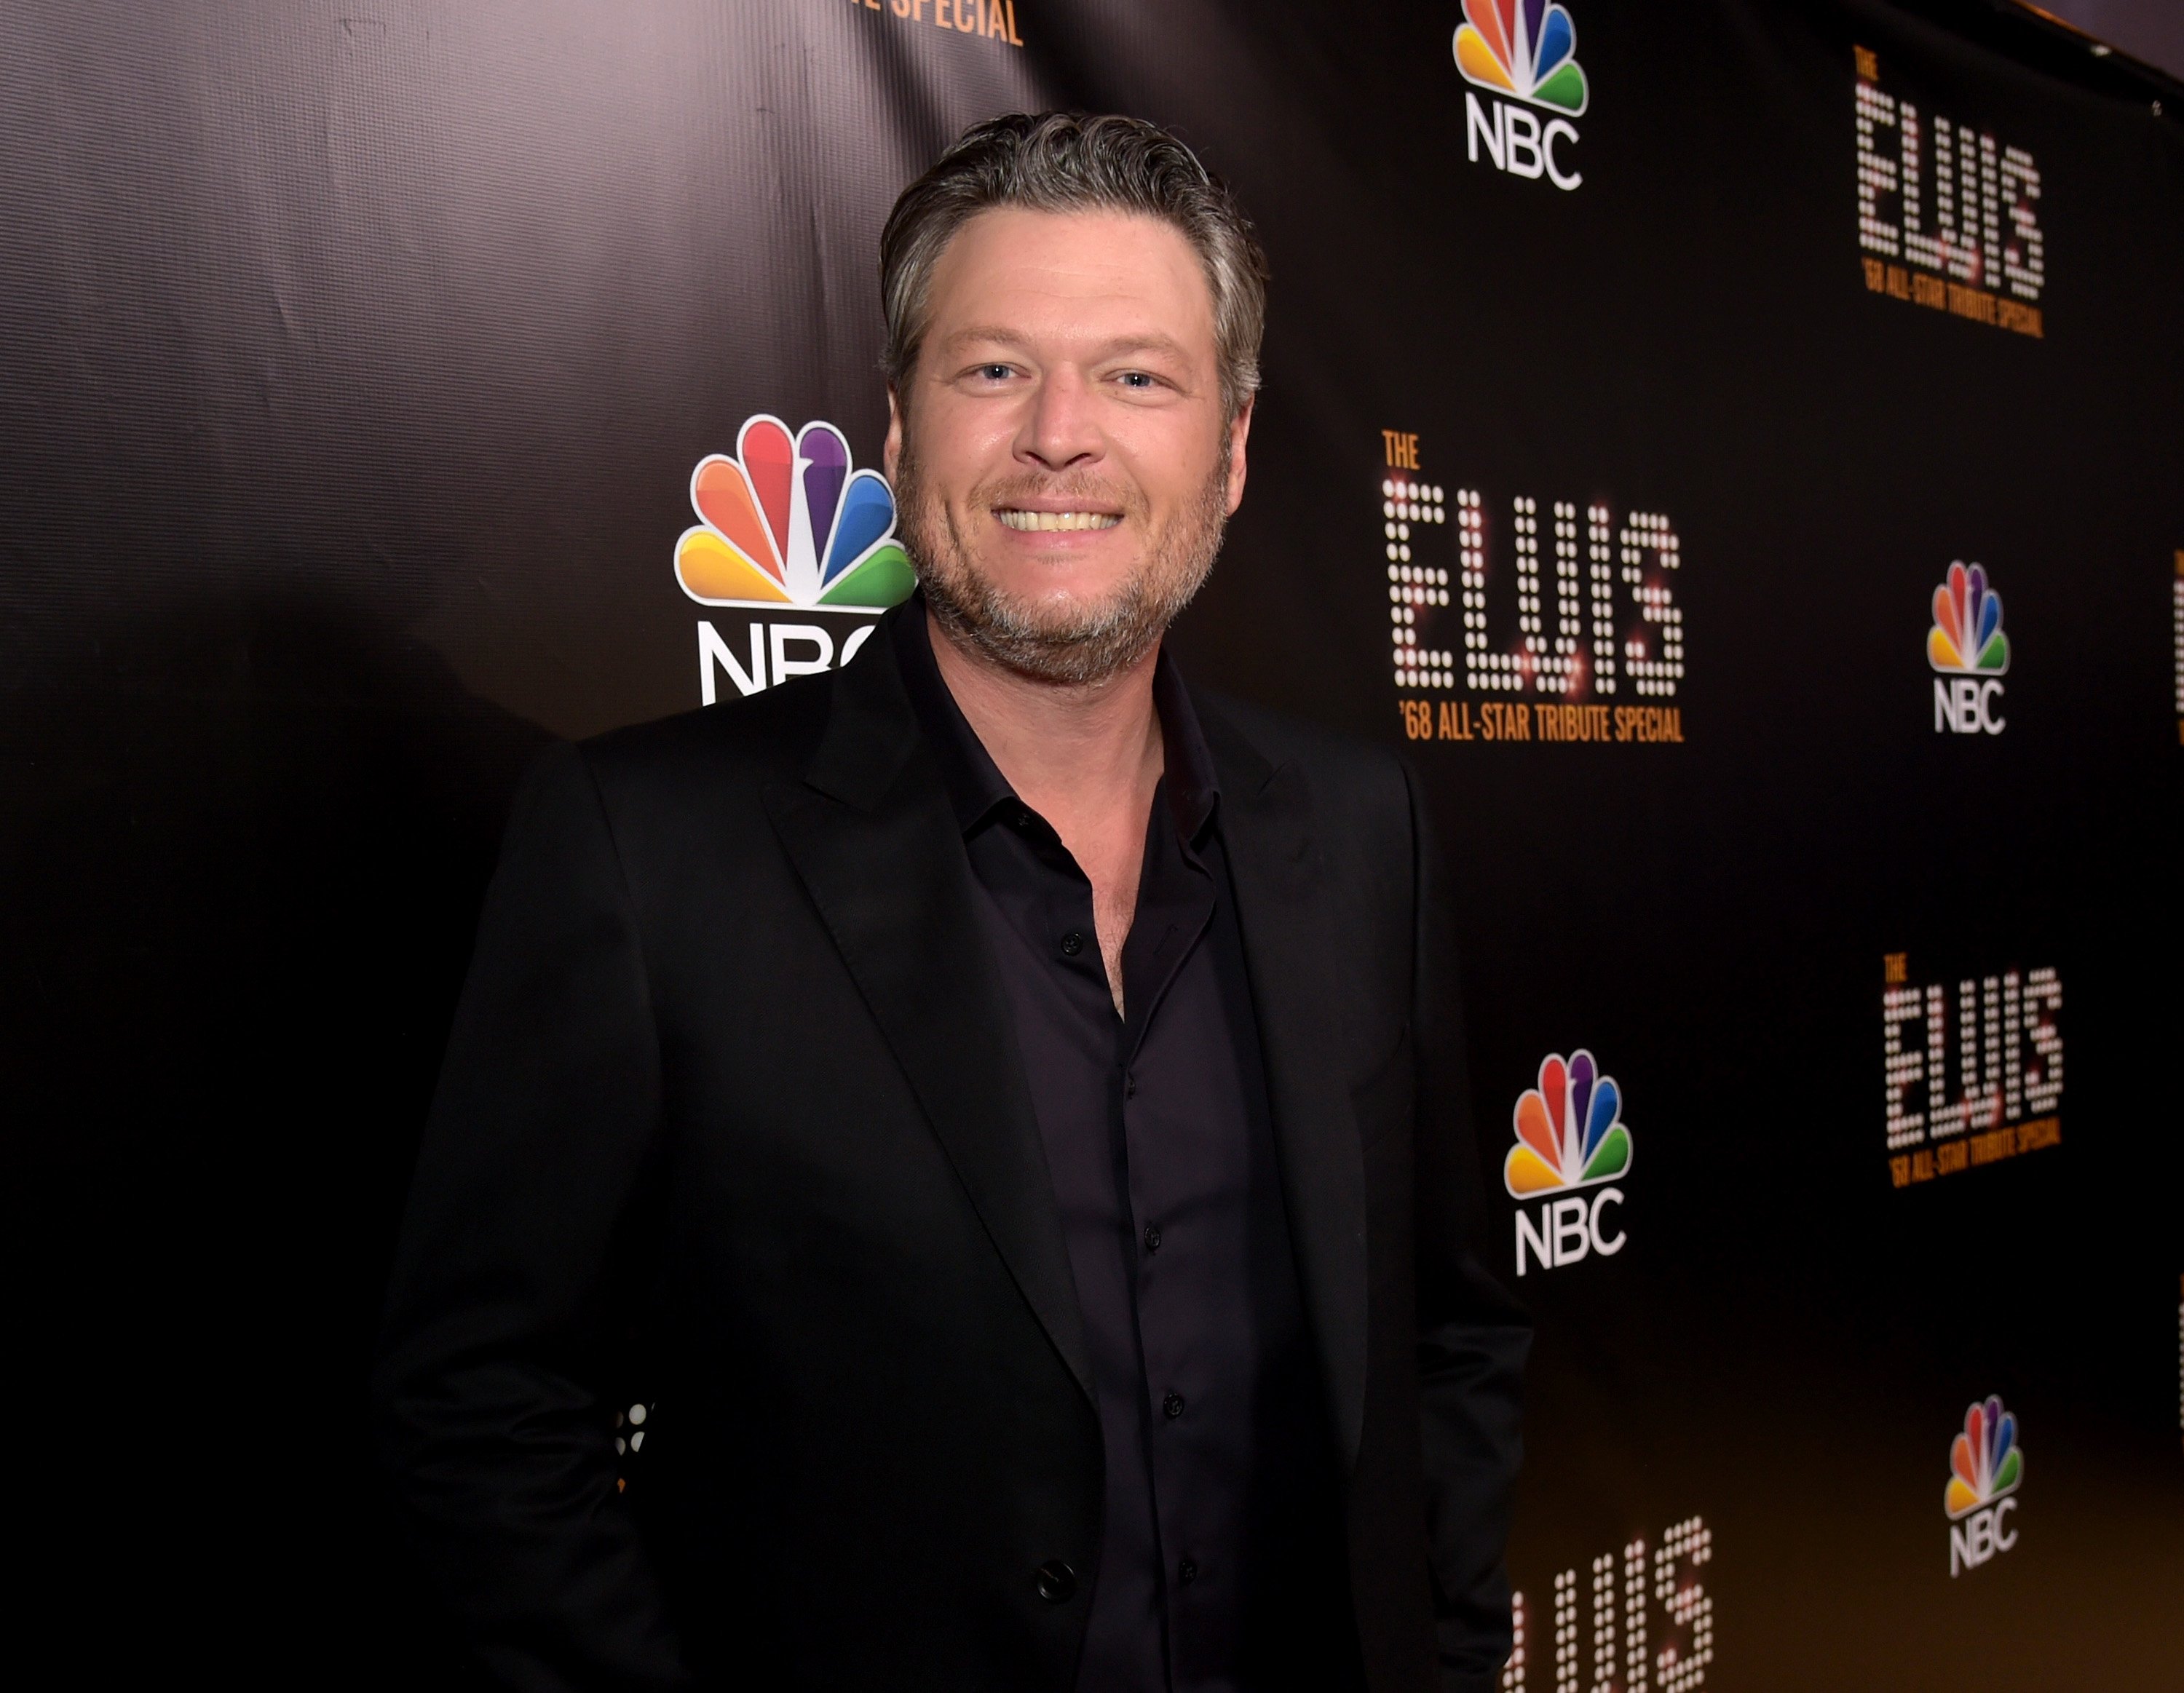 Blake Shelton attend The Elvis '68 All-Star Tribute Special on October 11, 2018, in Universal City, California. | Source: Getty Images.